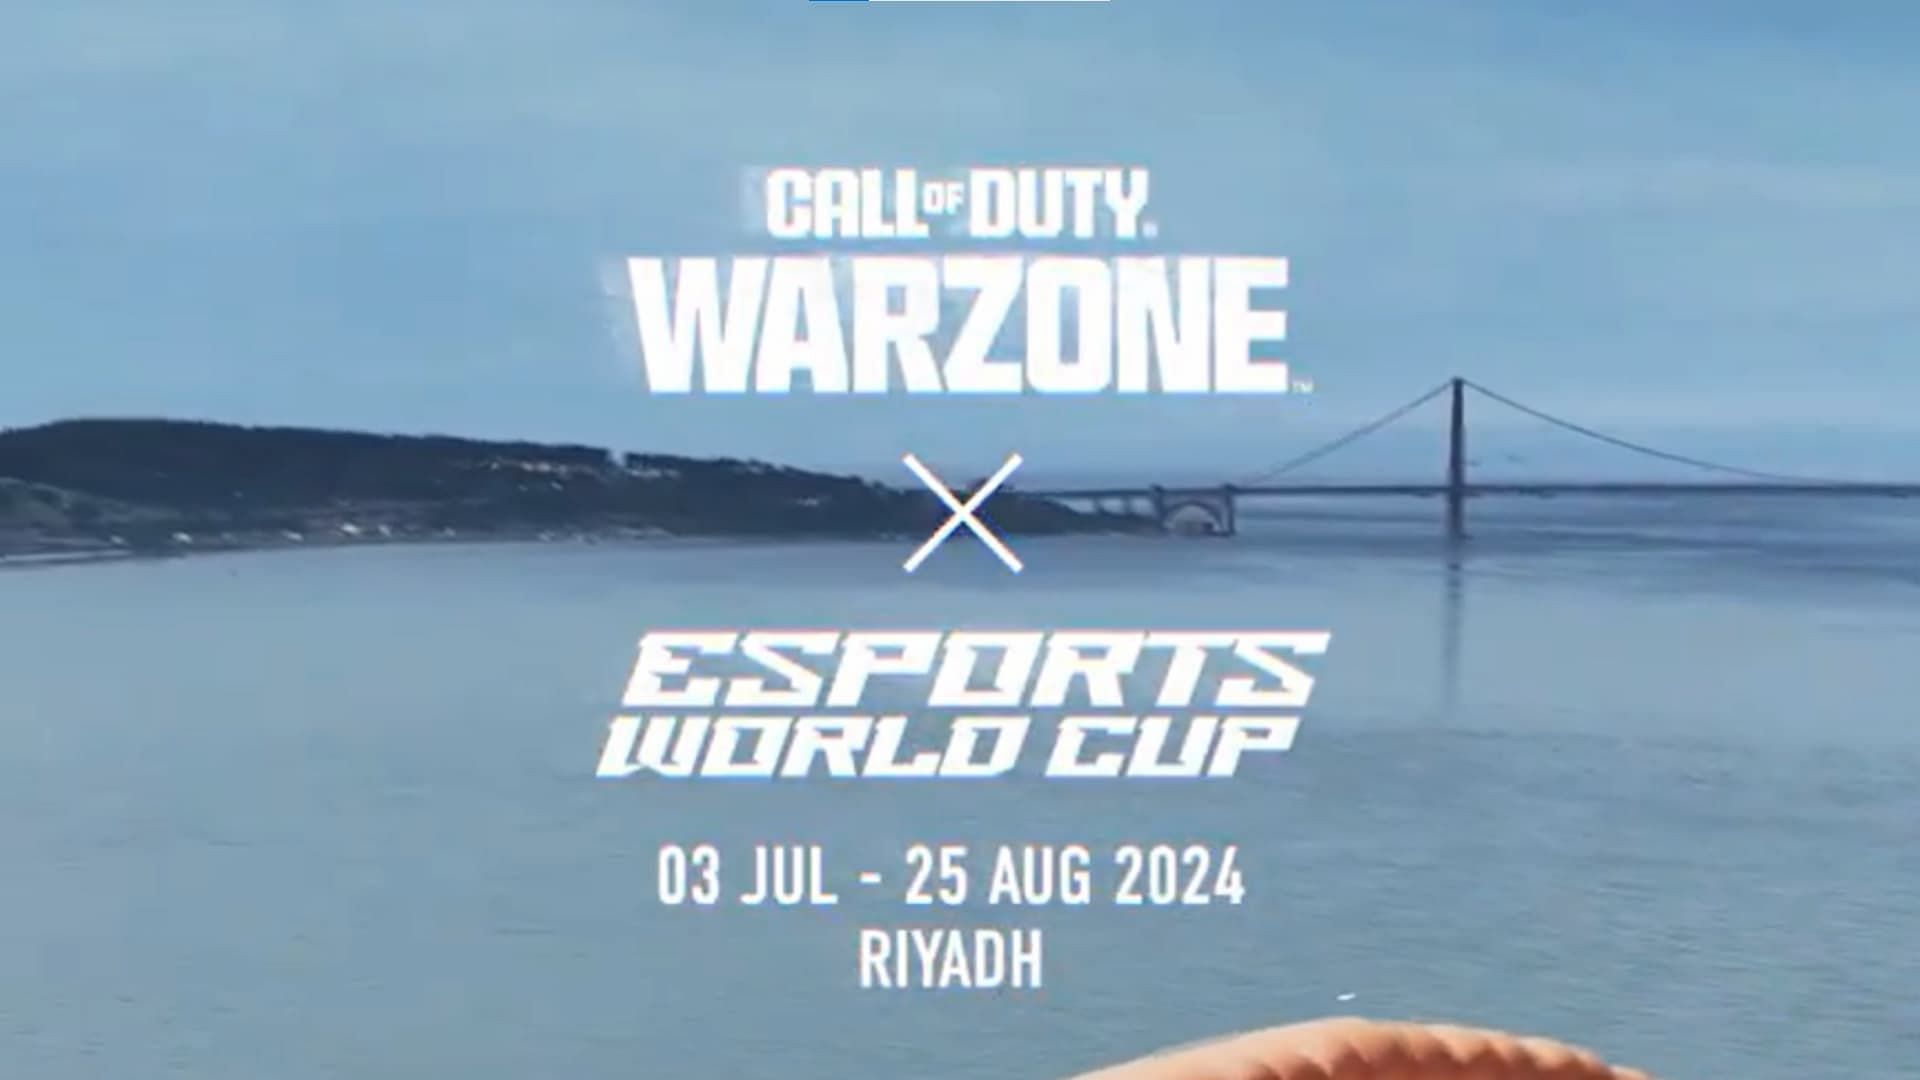 All teams in Call of Duty Warzone Esports World Cup 2024 